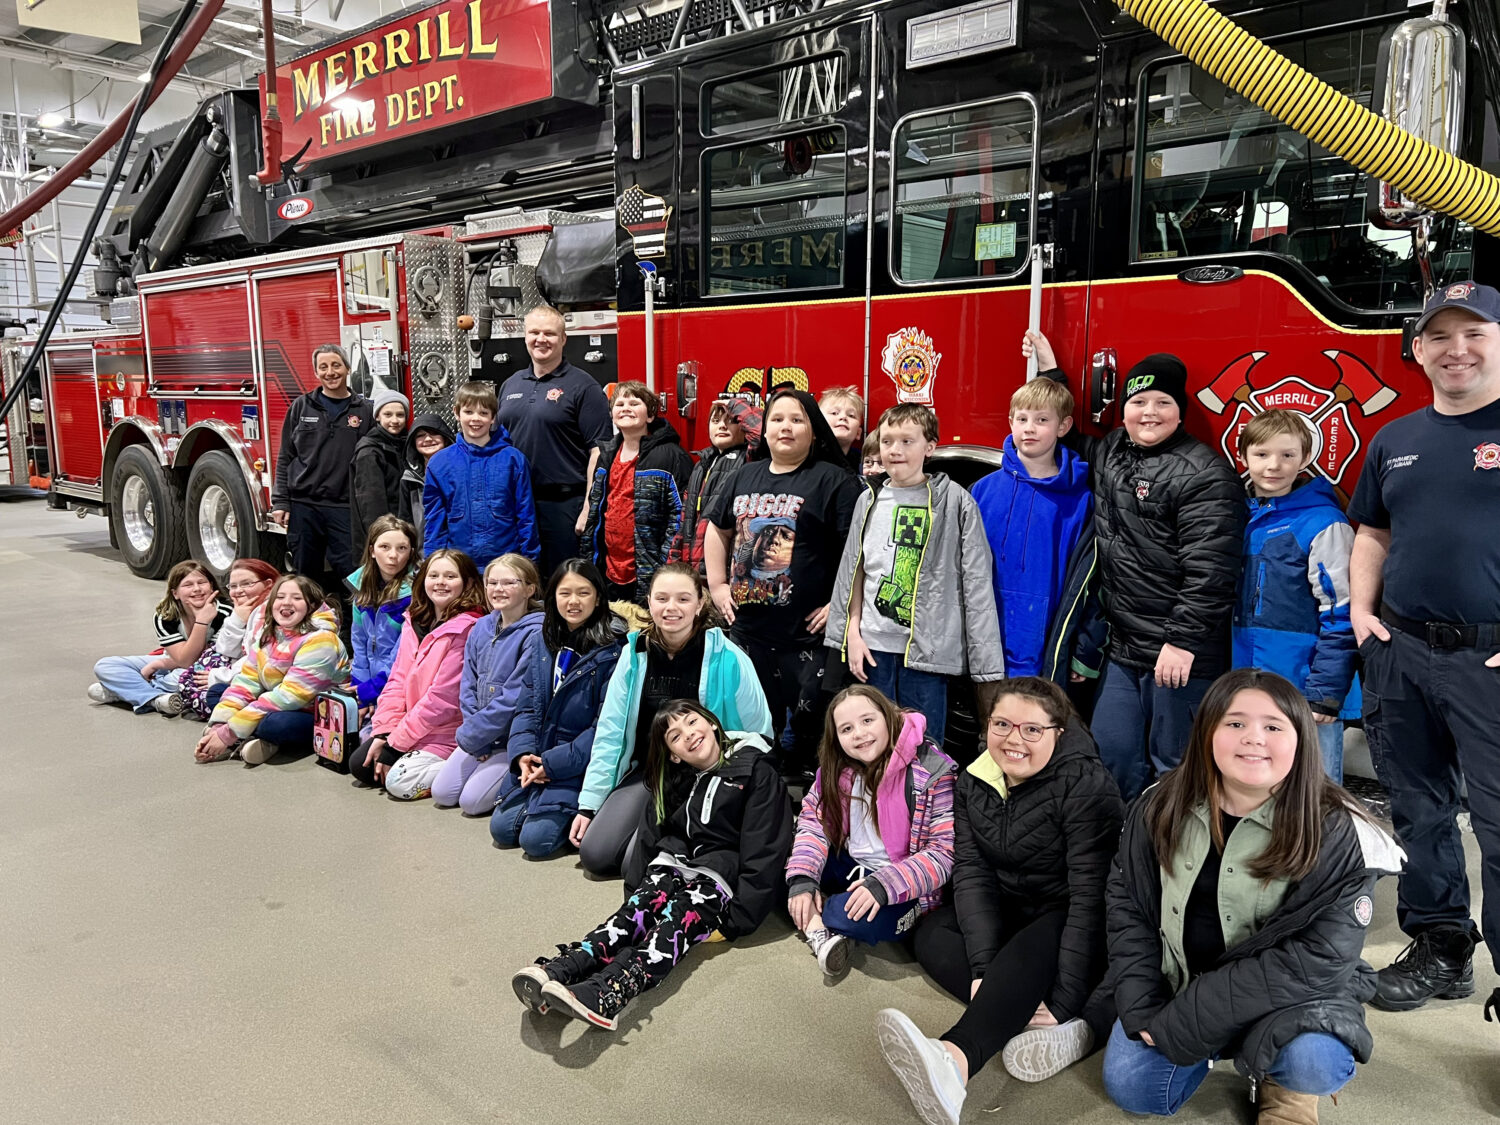 Merrill Fire Department hosts fourth graders